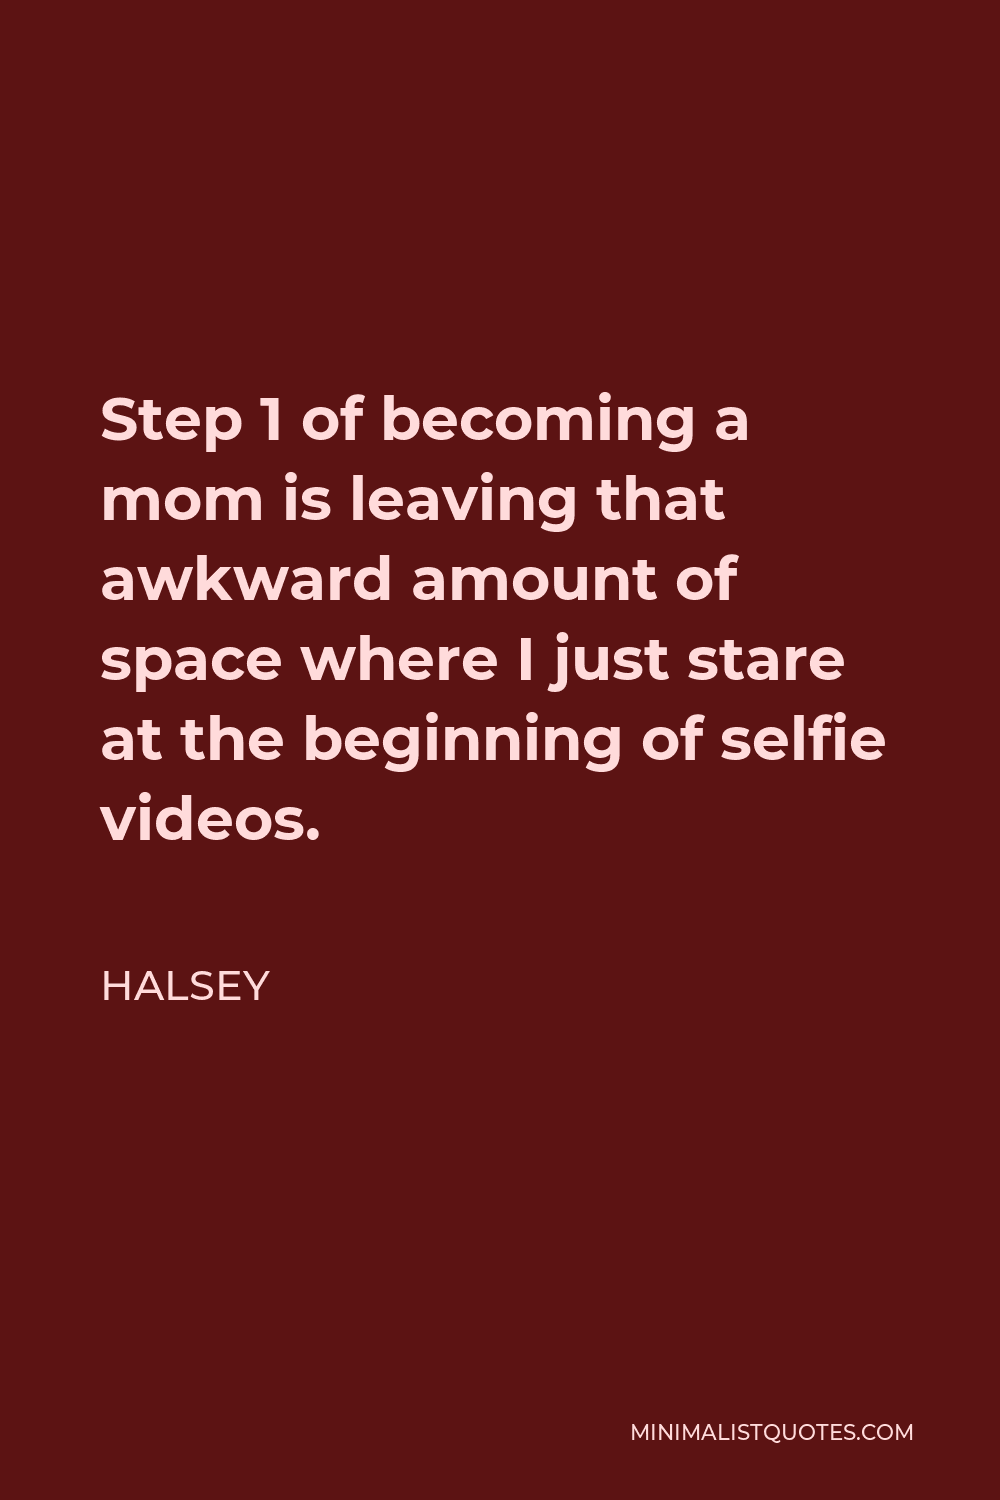 Halsey Quote - Step 1 of becoming a mom is leaving that awkward amount of space where I just stare at the beginning of selfie videos.